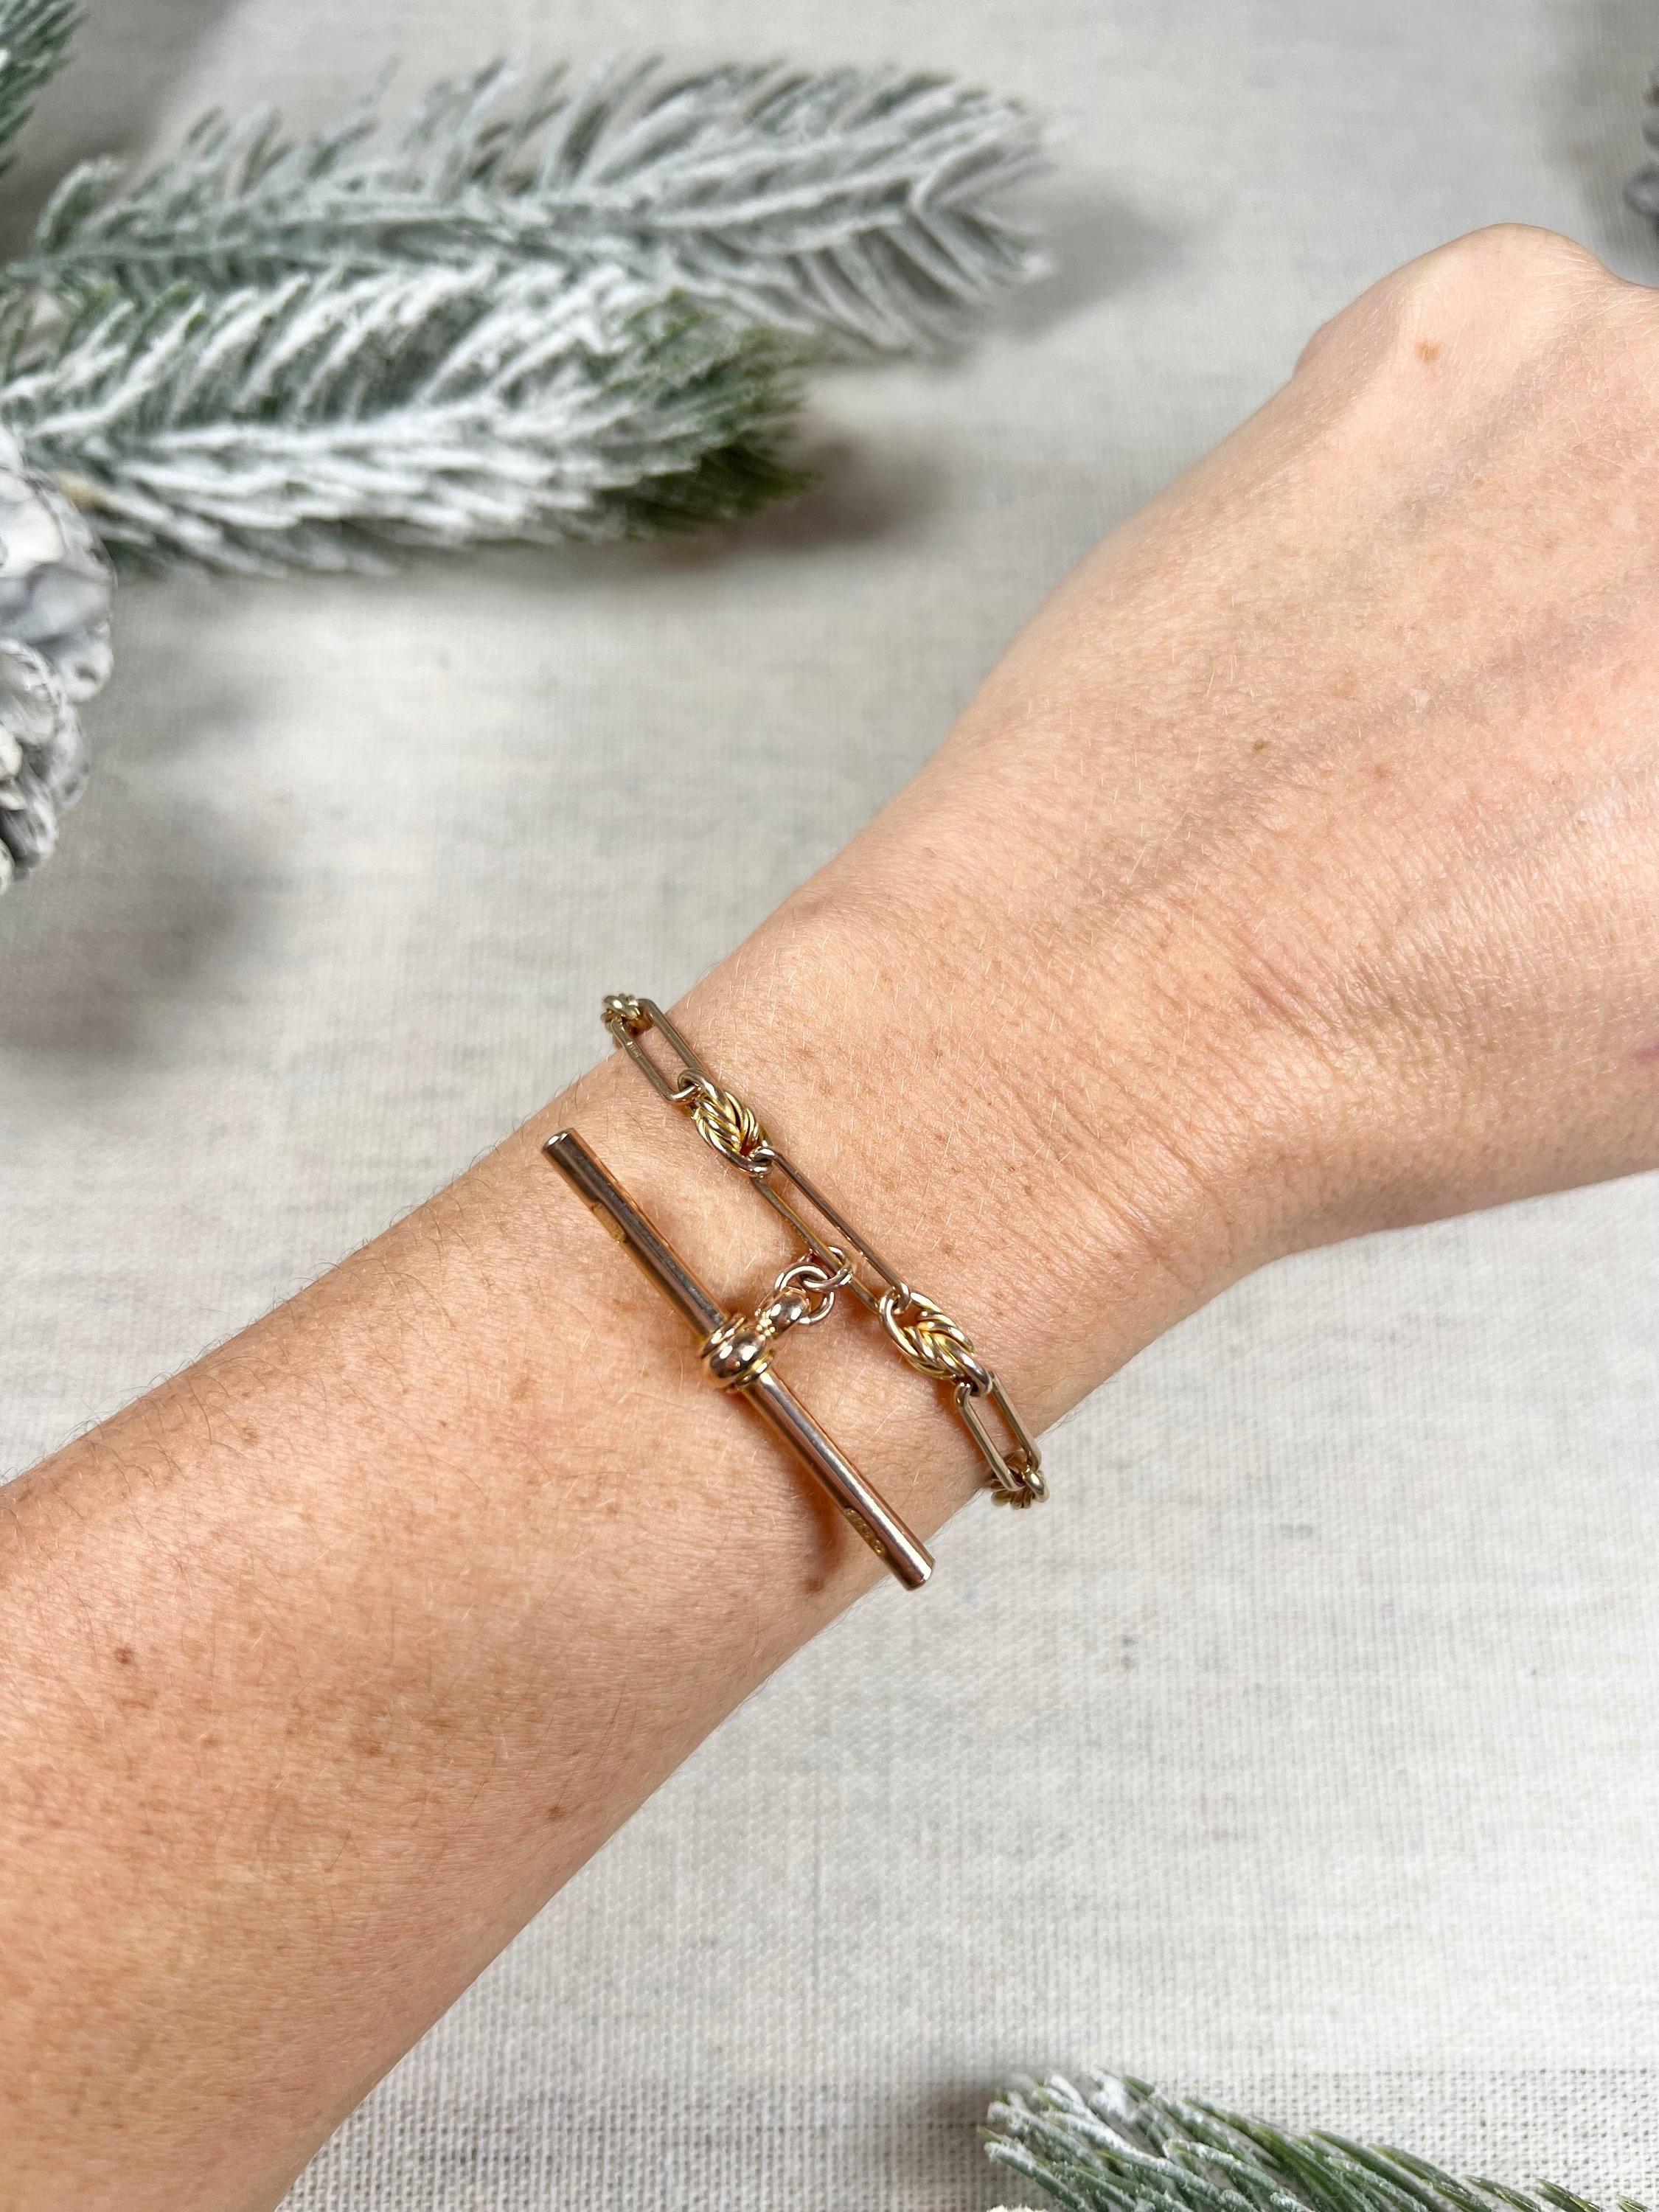 Antique Trombone Bracelet 

9ct Rose Gold Stamped

Circa 1900

Makers Mark P & M

This 9ct rose gold Edwardian trombone link bracelet is an exquisite piece of jewellery that is sure to capture your attention. This bracelet is crafted with the finest